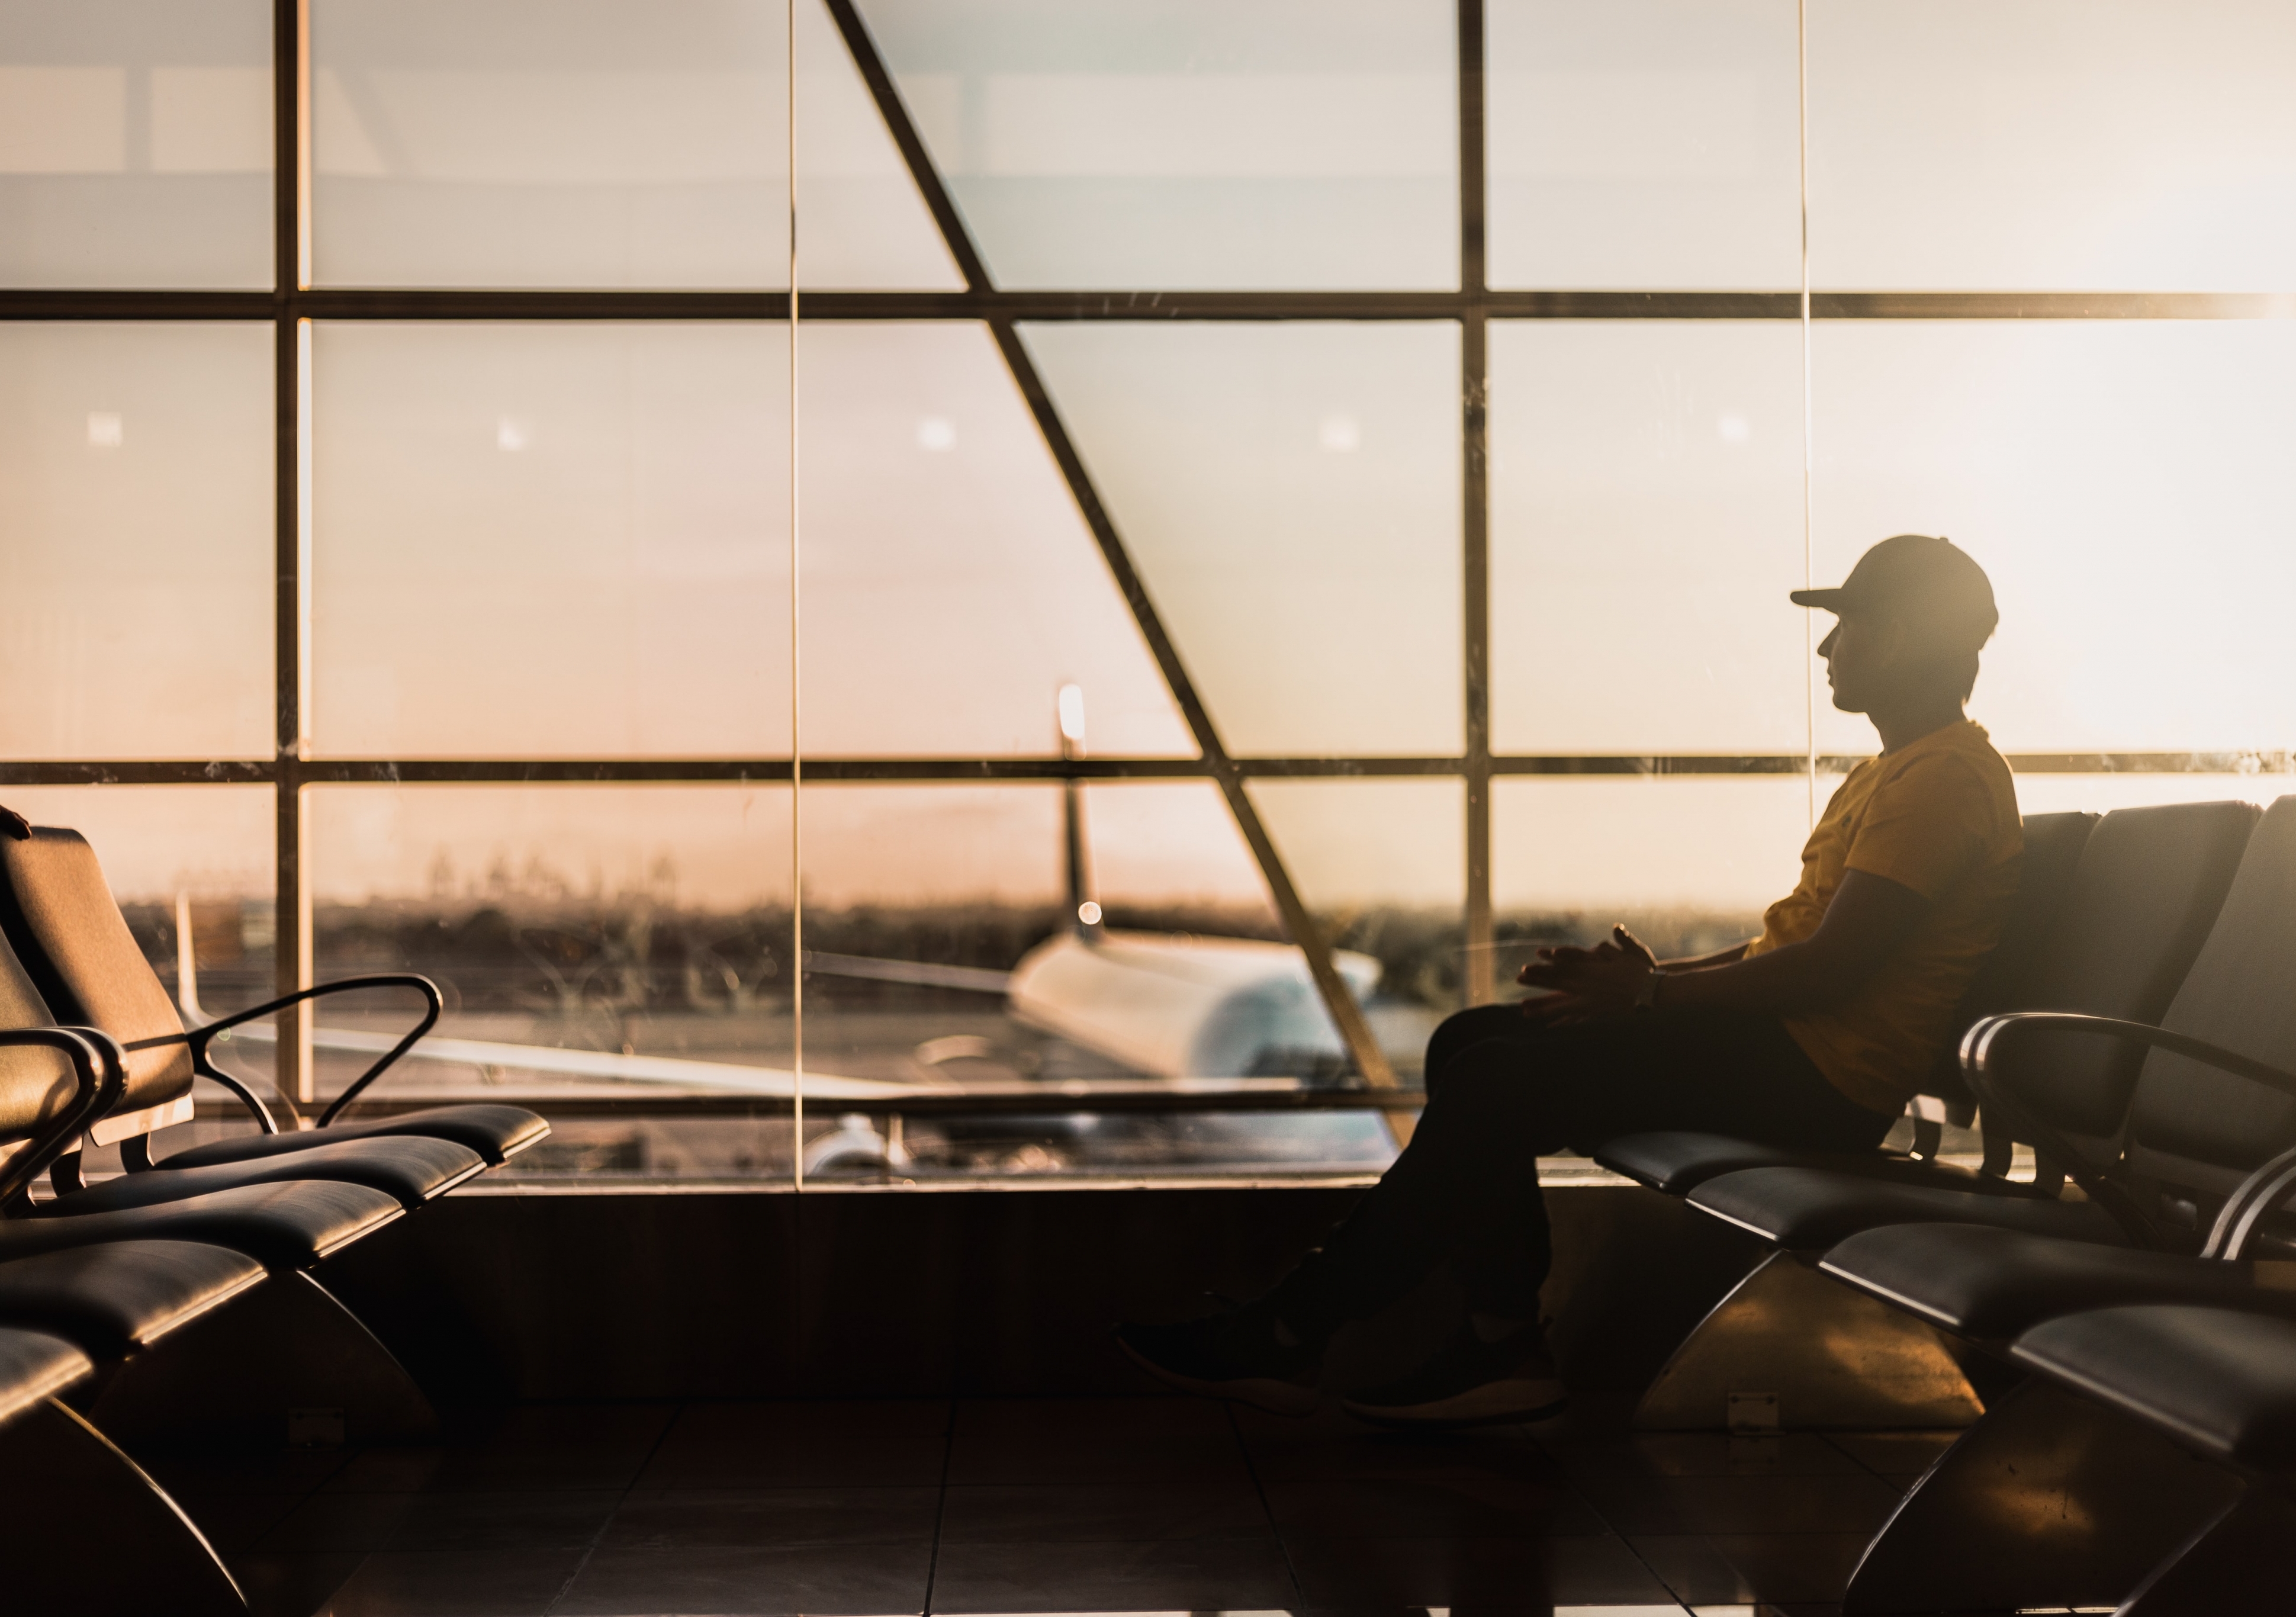 The Kaldor Centre released a policy brief with recommendations on how to improve airport asylum procedures. Photo: Unsplash